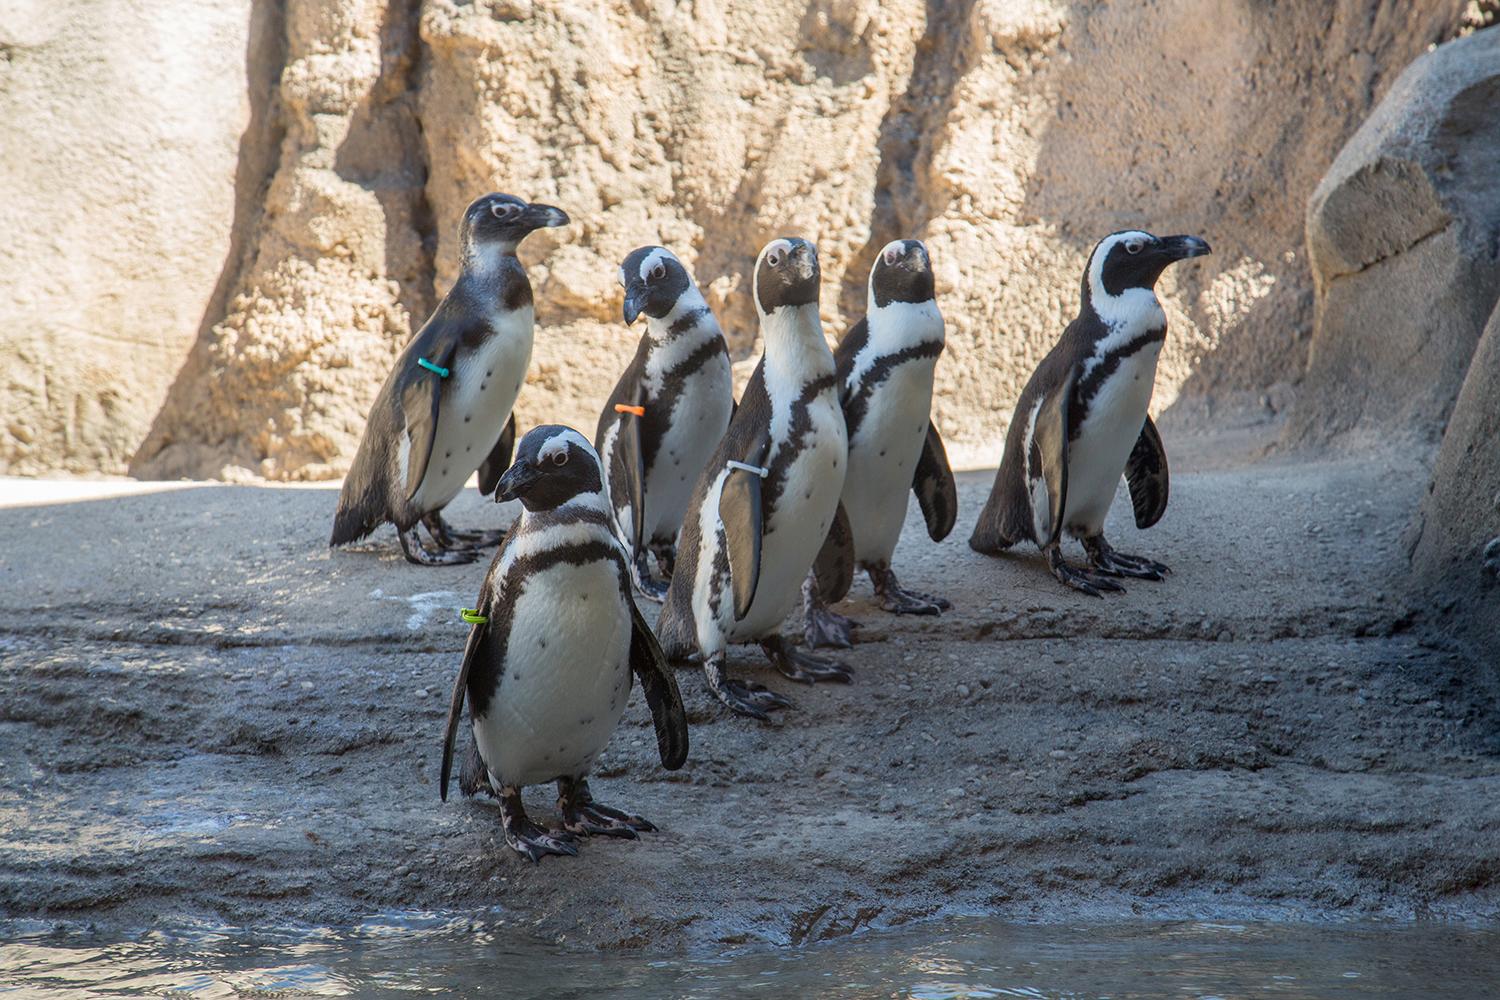 Penguins at Lincoln Park Zoo took notice of Monday's solar eclipse, research scientist Katie Cronin said. (Julia Fuller / Lincoln Park Zoo)